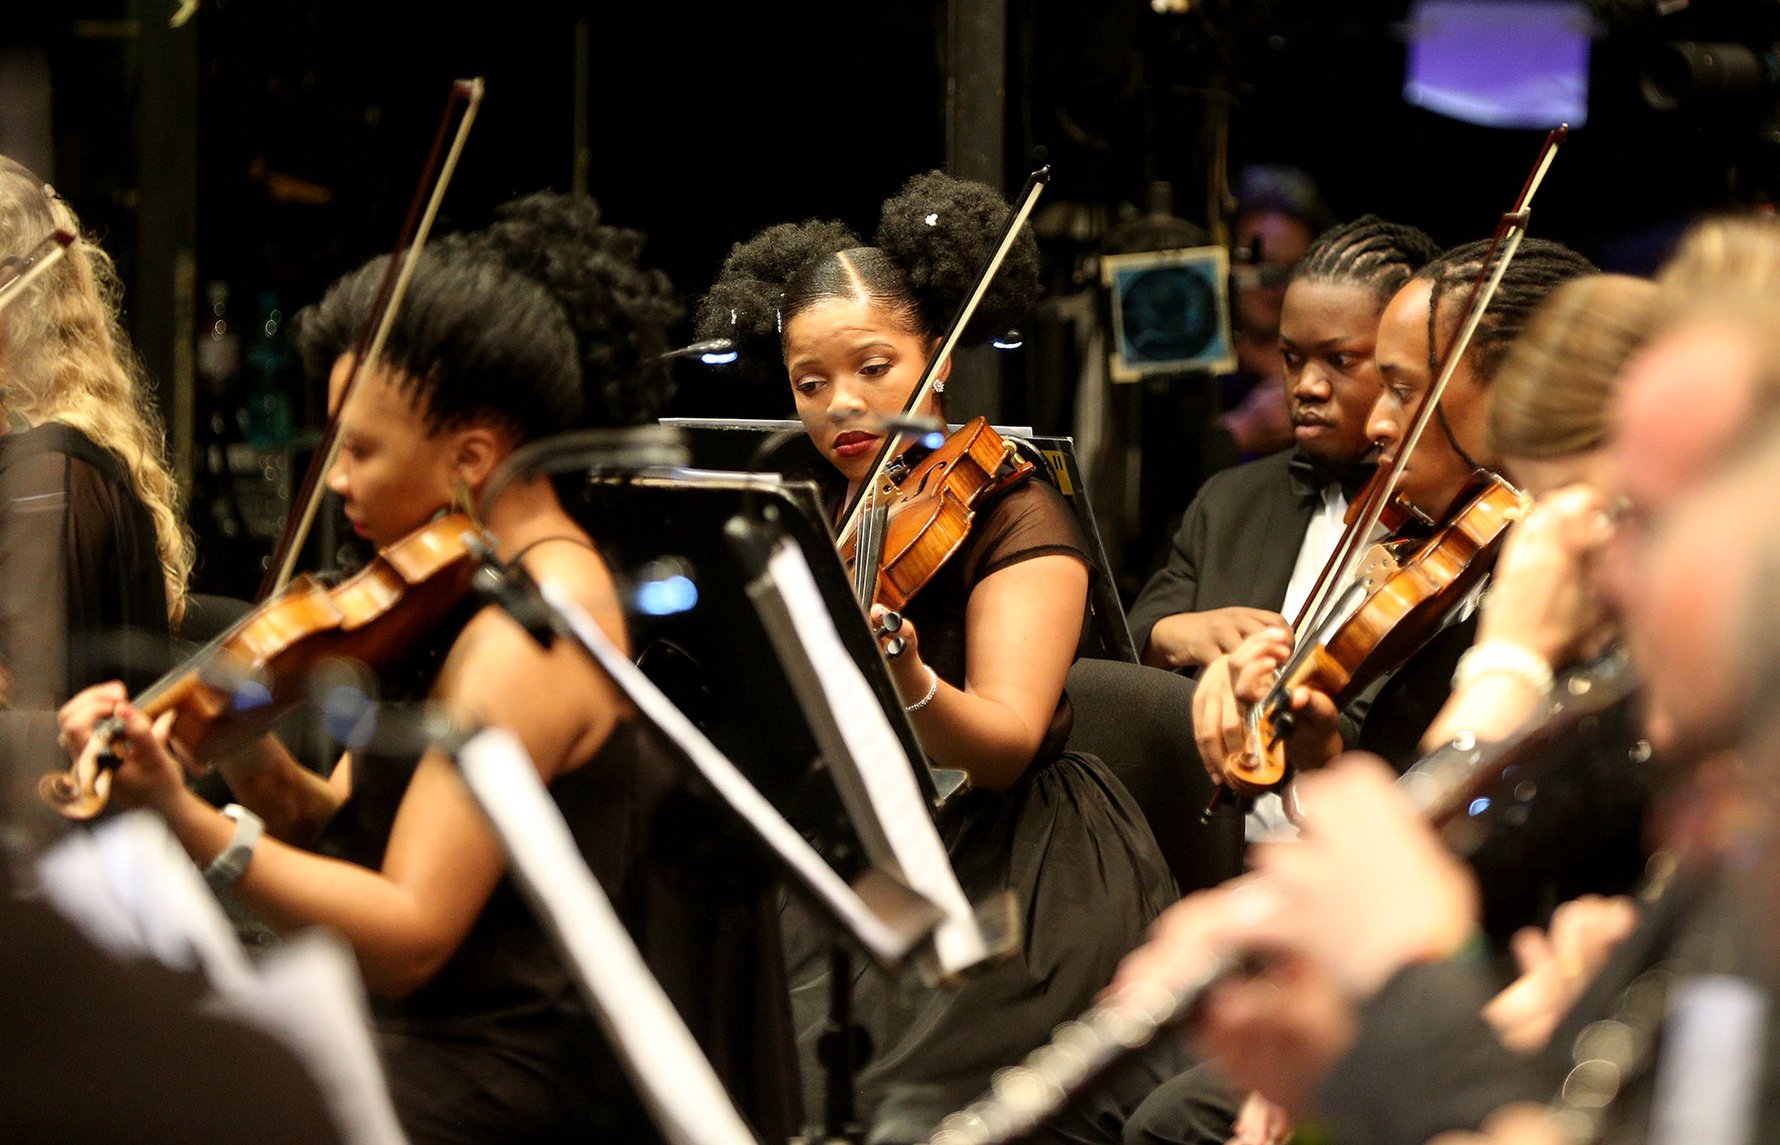 Members of the Mzansi National Philharmonic Orchestra weaving their magic in performance.